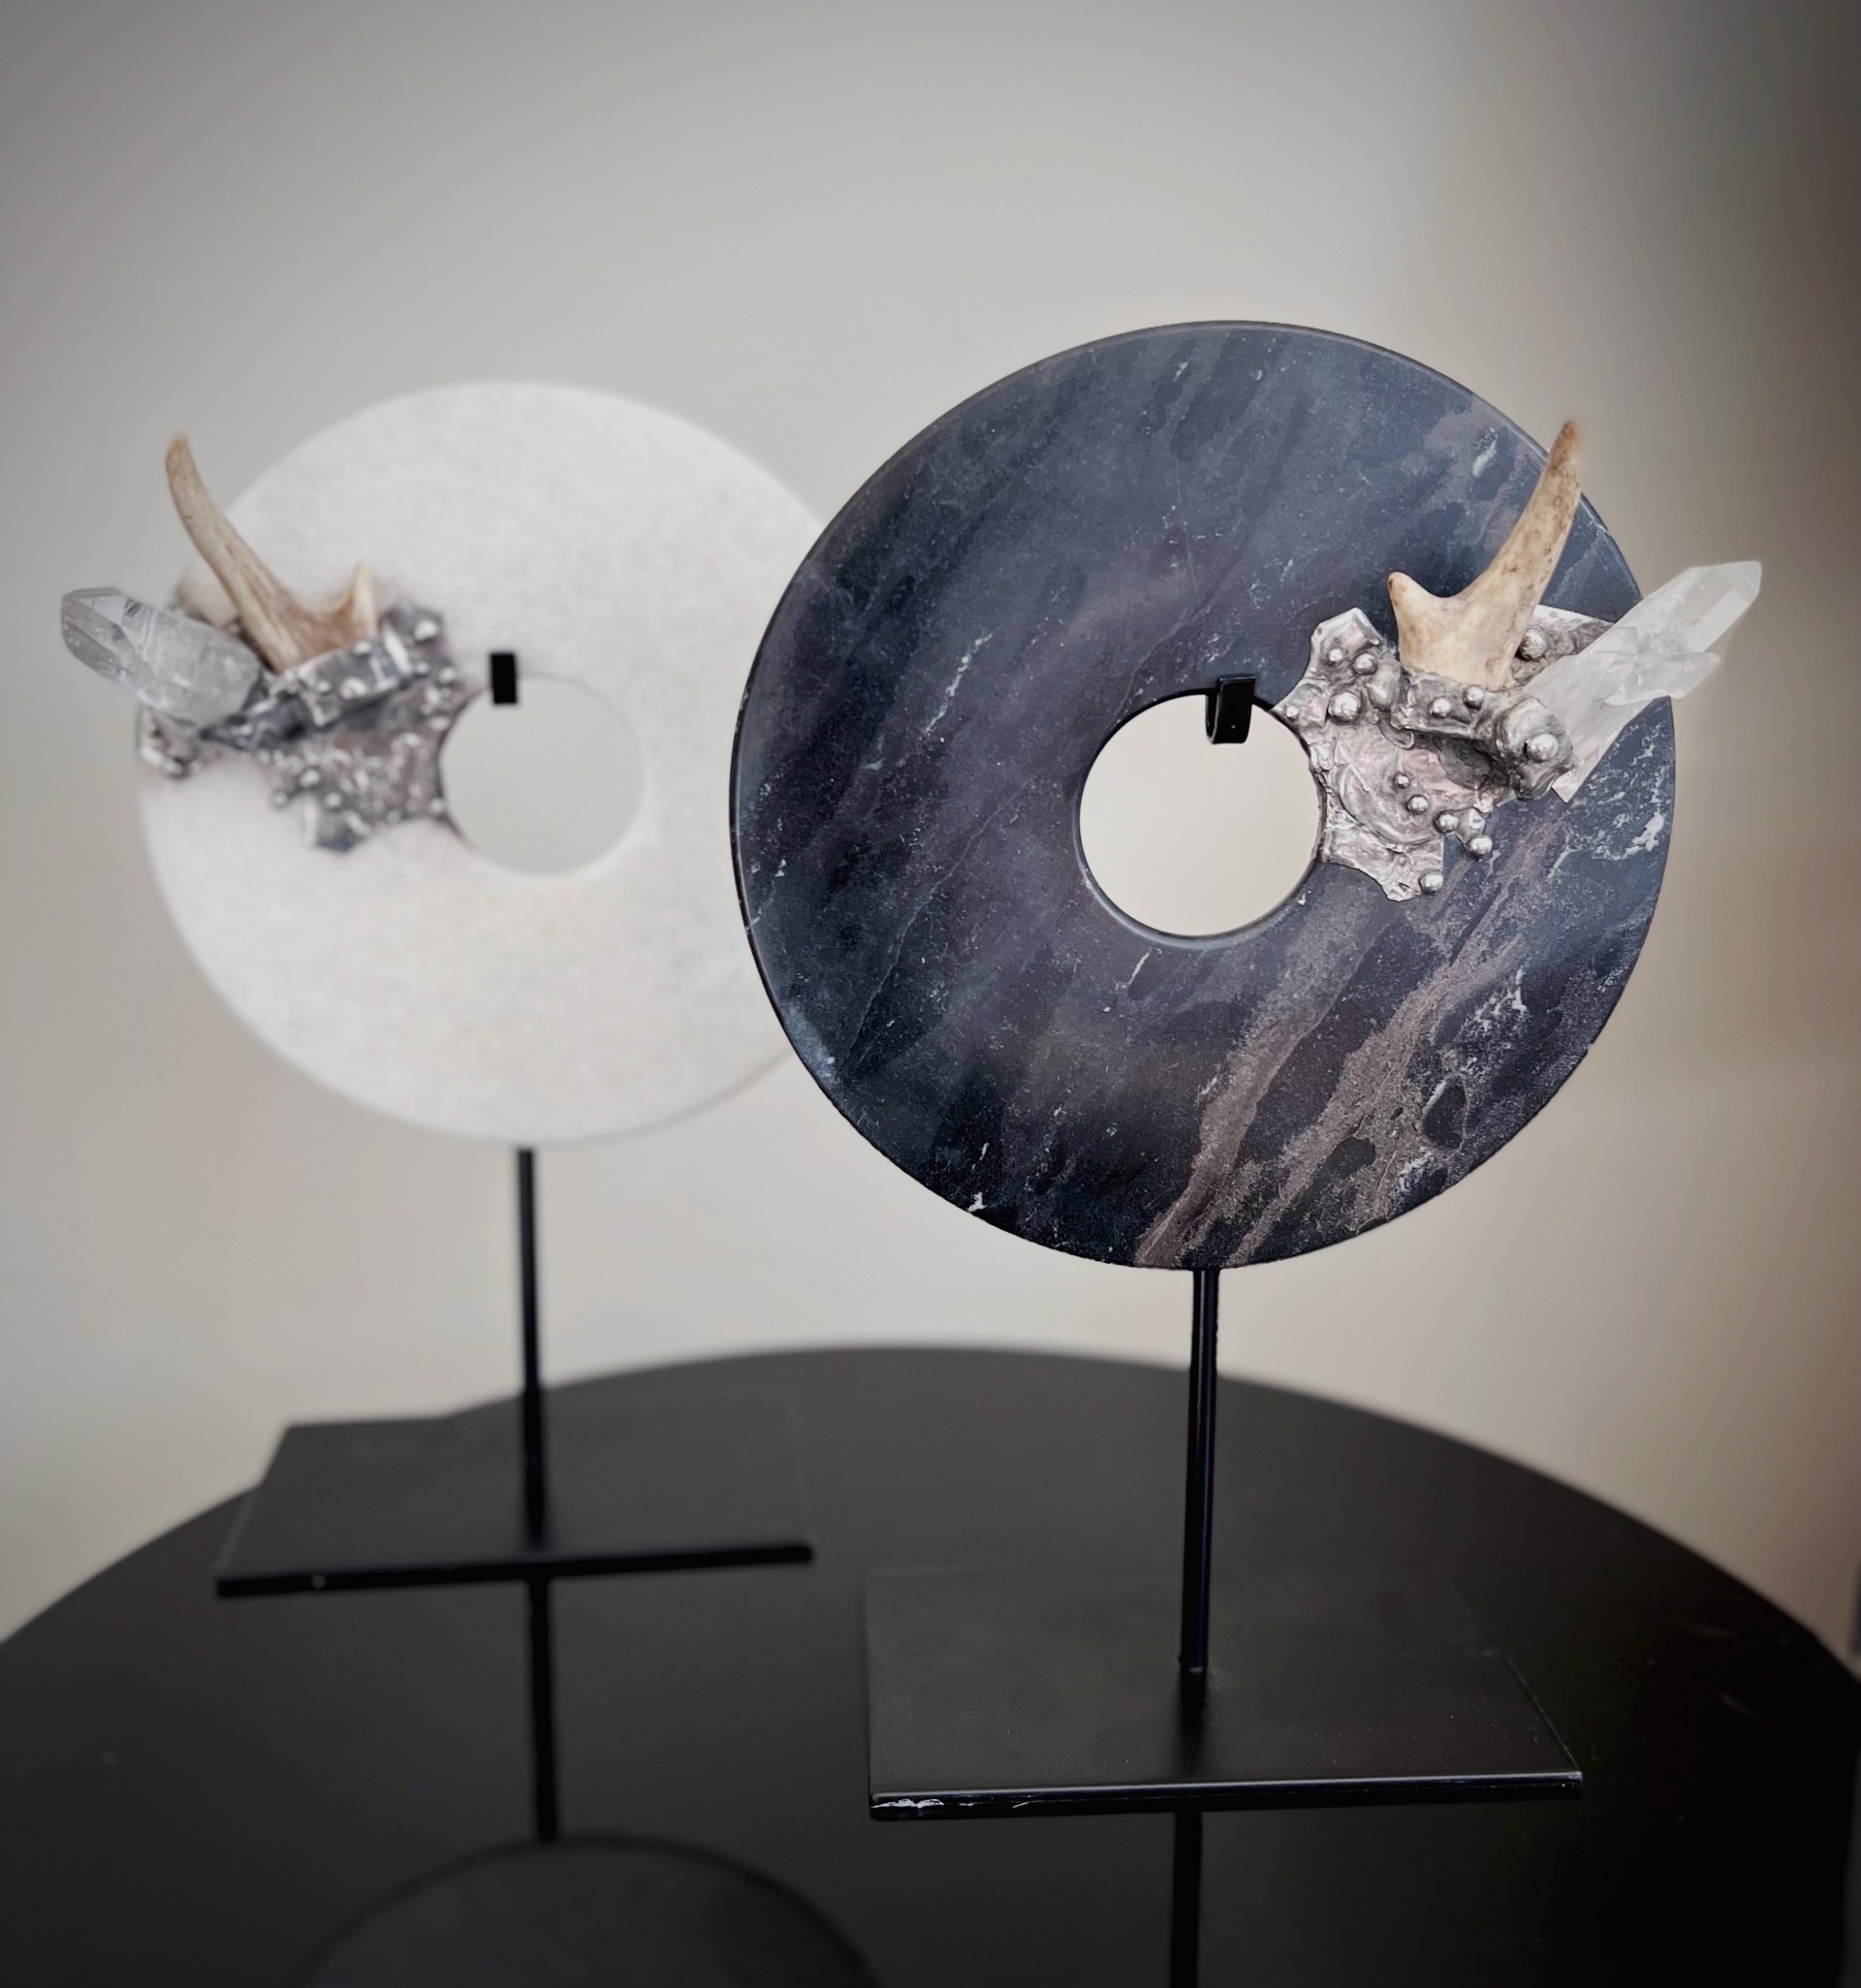 Stone Disks with Quartz/Antlers on Stand by Trinka 5 Designs